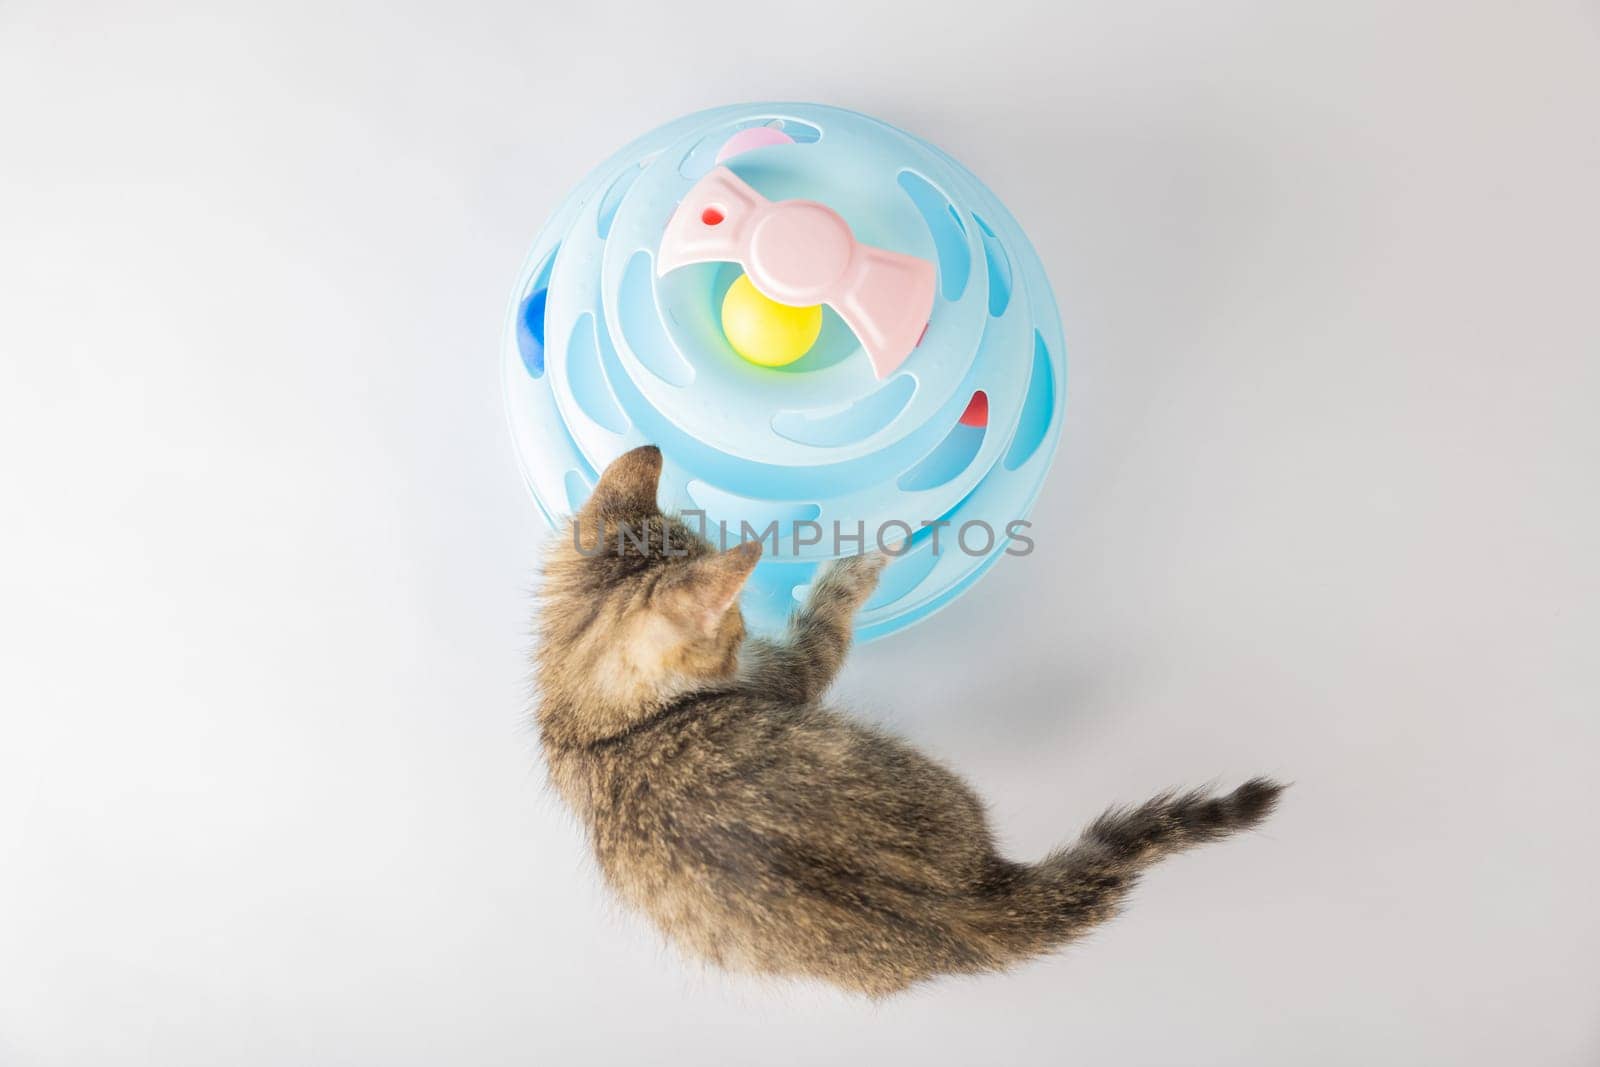 A young kitten's playful exploration with a blue toy pyramid spiral tower captures the essence of a happy pet. With a funny and adorable feline portrait, this cat's antics are bound to make you smile.